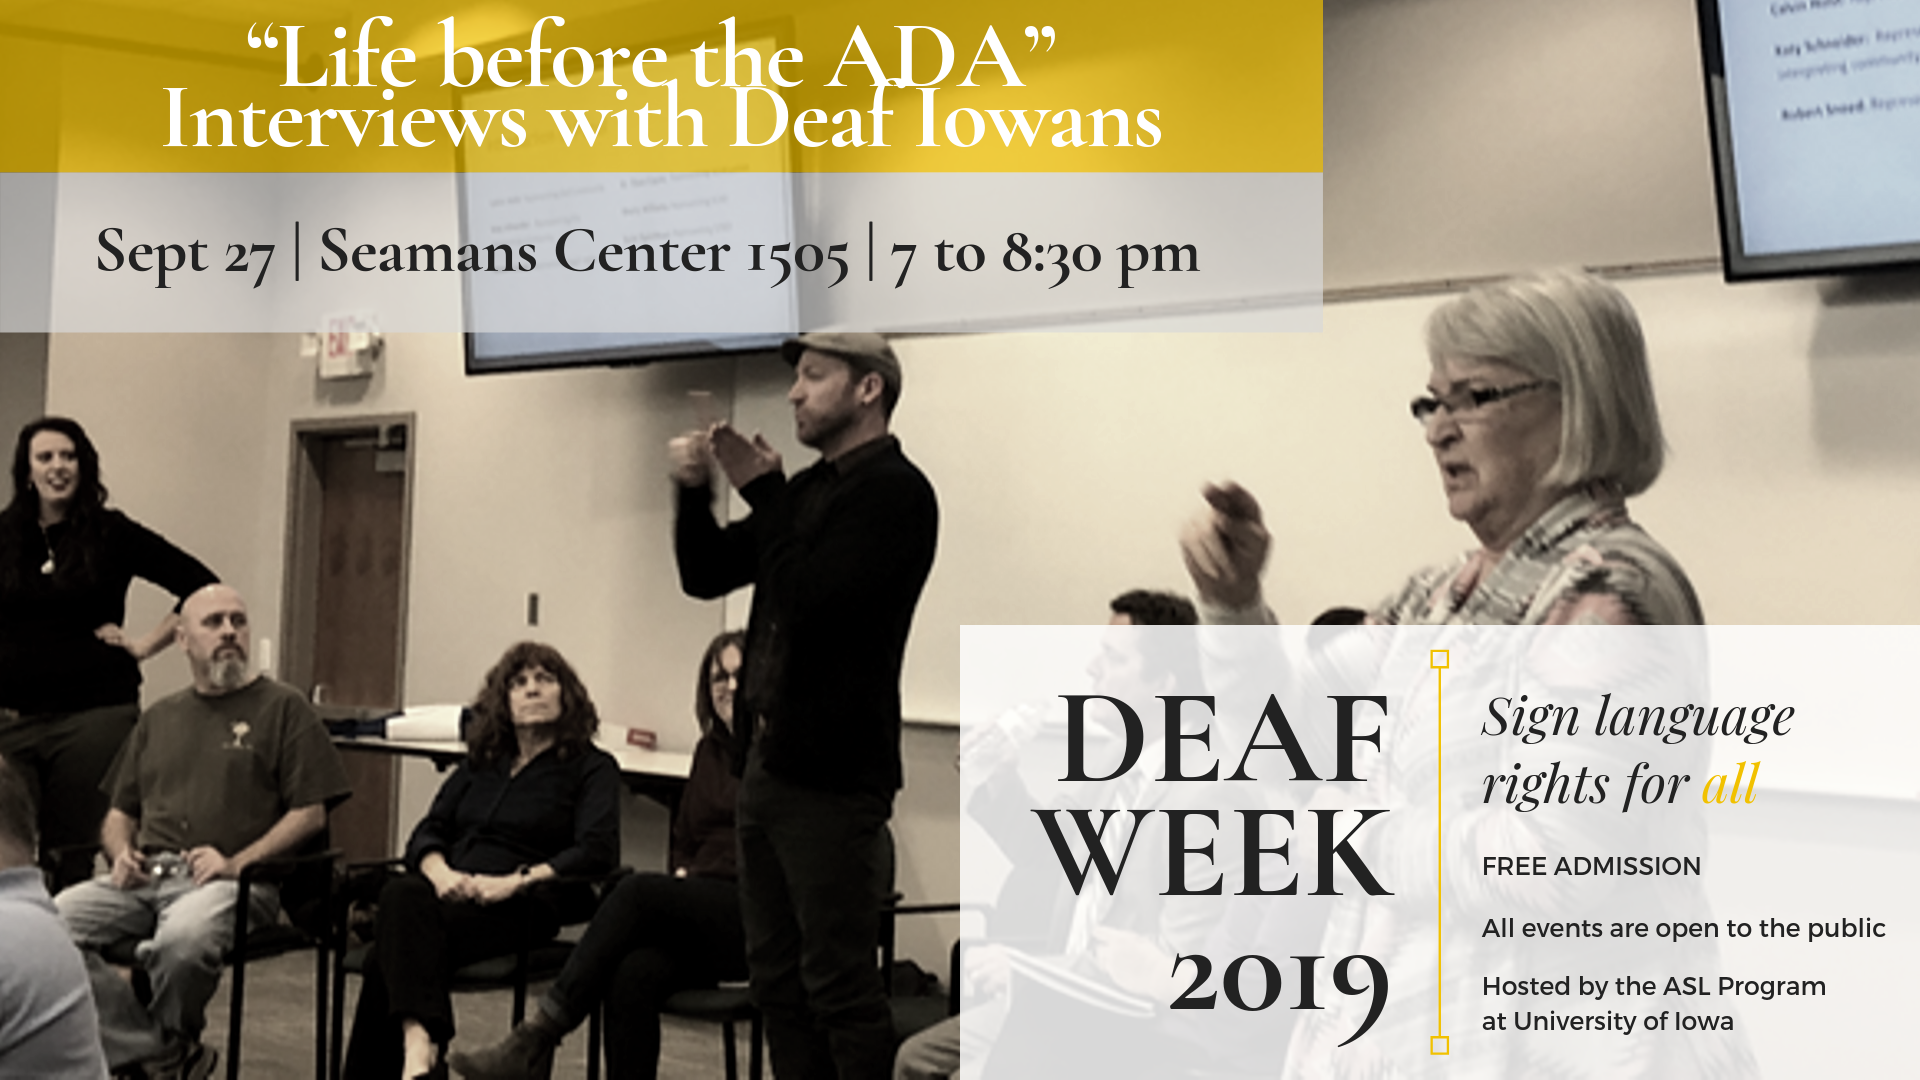 "Life before the ADA" interviews with deaf iowans September 27 in the Seamans Center 1505 at 7:00-8:30pm Deaf Week 2019 Sign language rights for all Free Admission All events are open to the public Hosted by the ASL Department at the University of Iowa